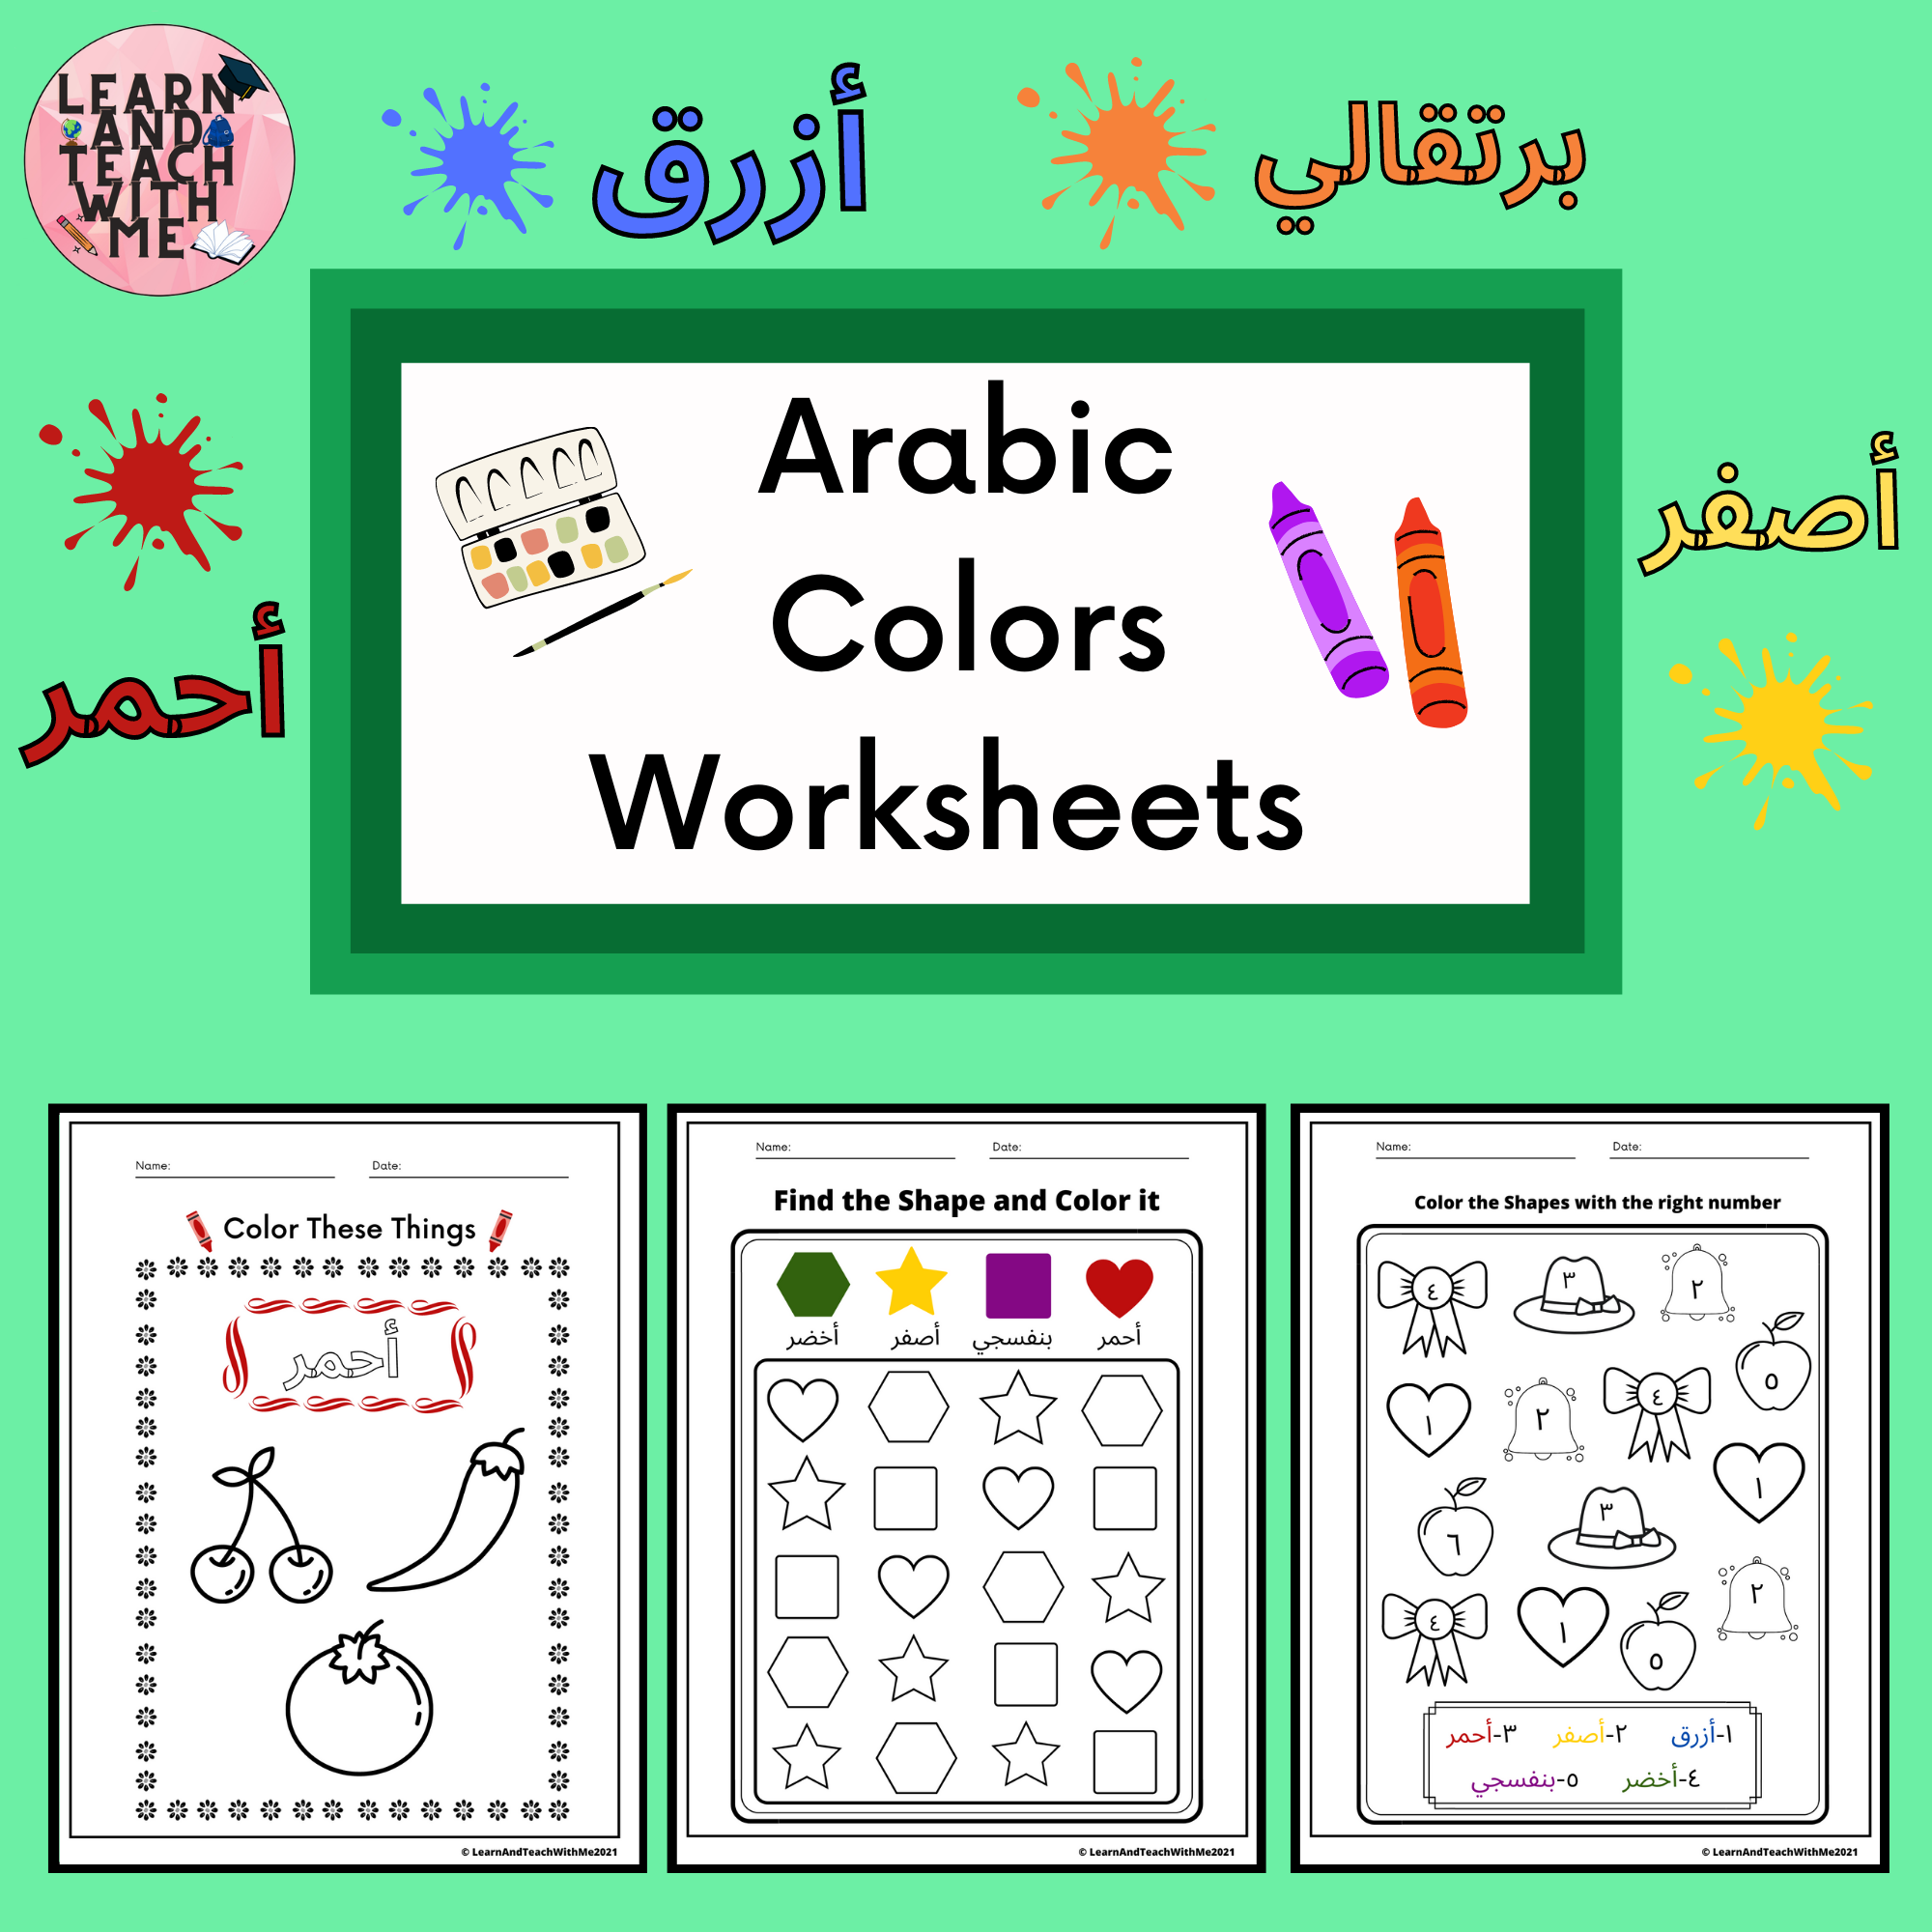 Arabic color word worksheets and coloring pages made by teachers